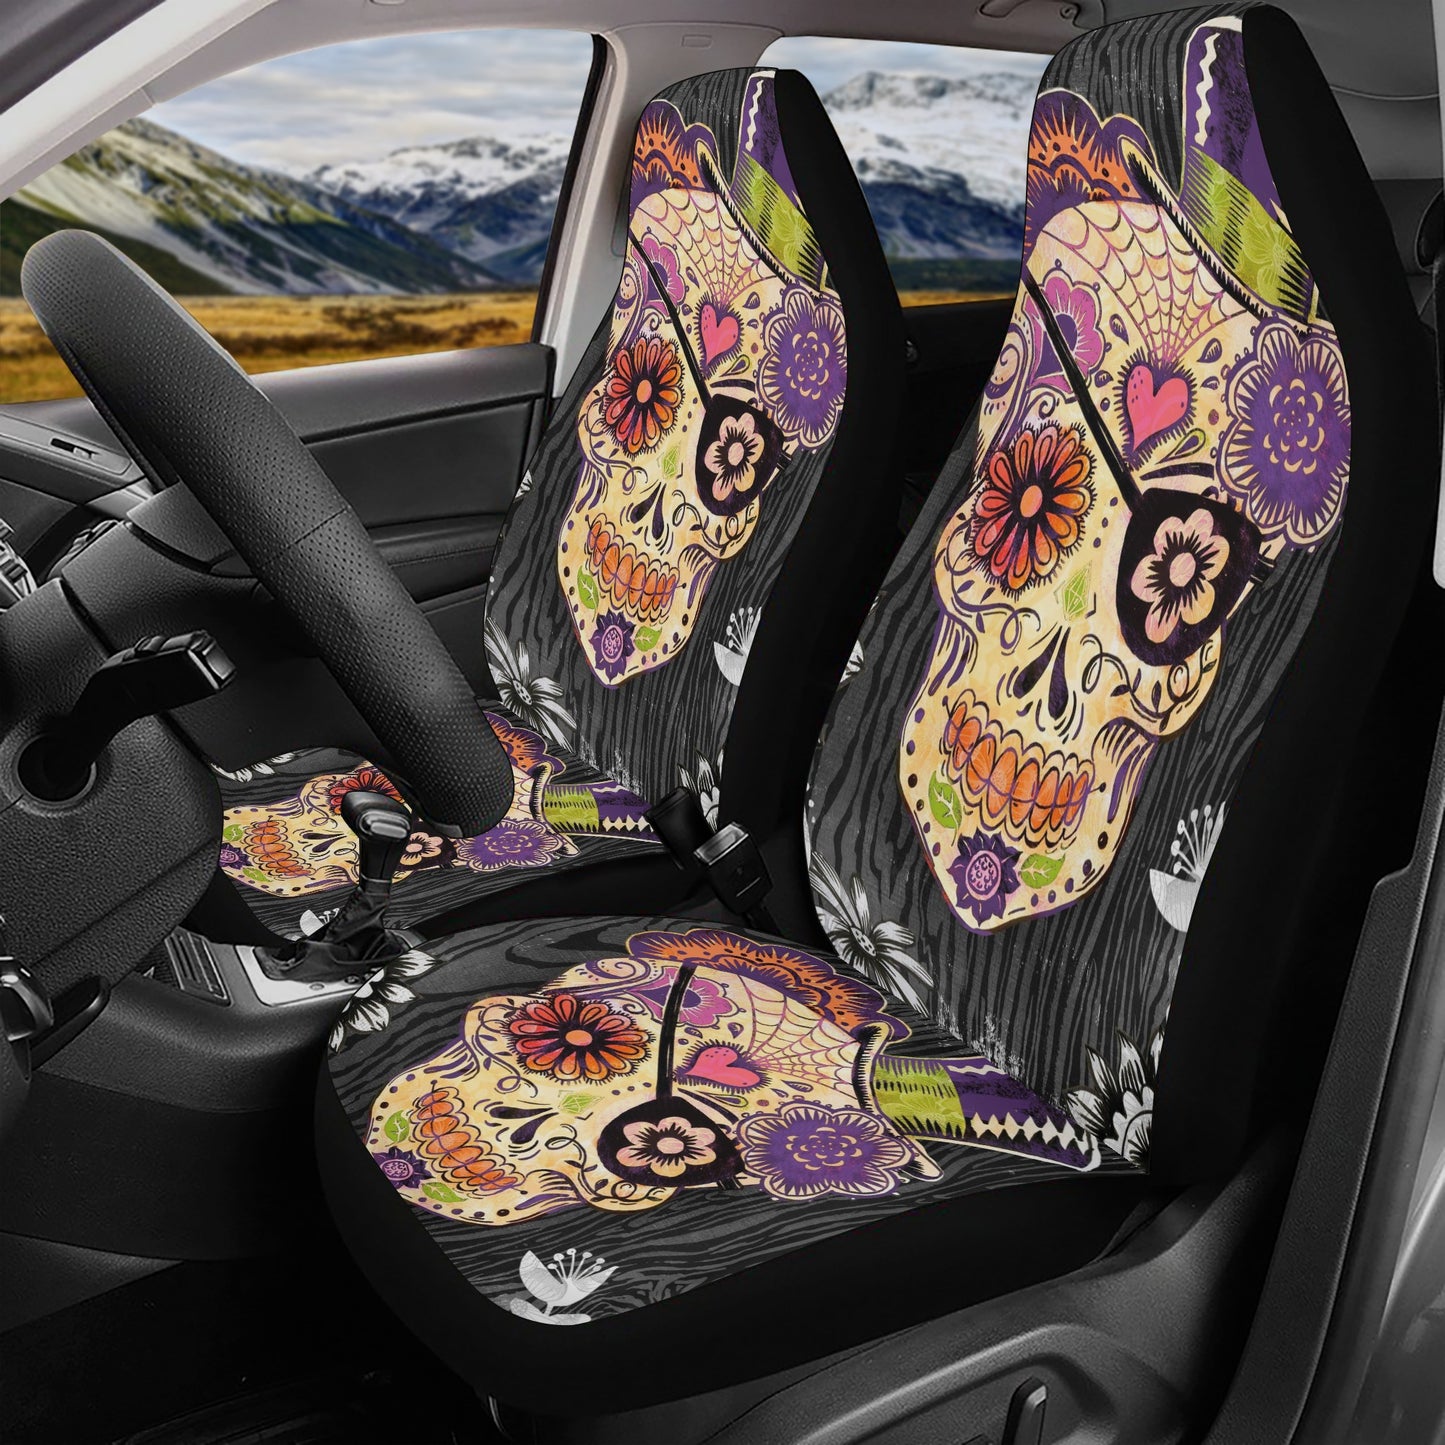 Mexico seat cover for vehicles, candy skull front and back car seat covers, sugar skull car rug, sugar skull seat cover for truck, candy sku